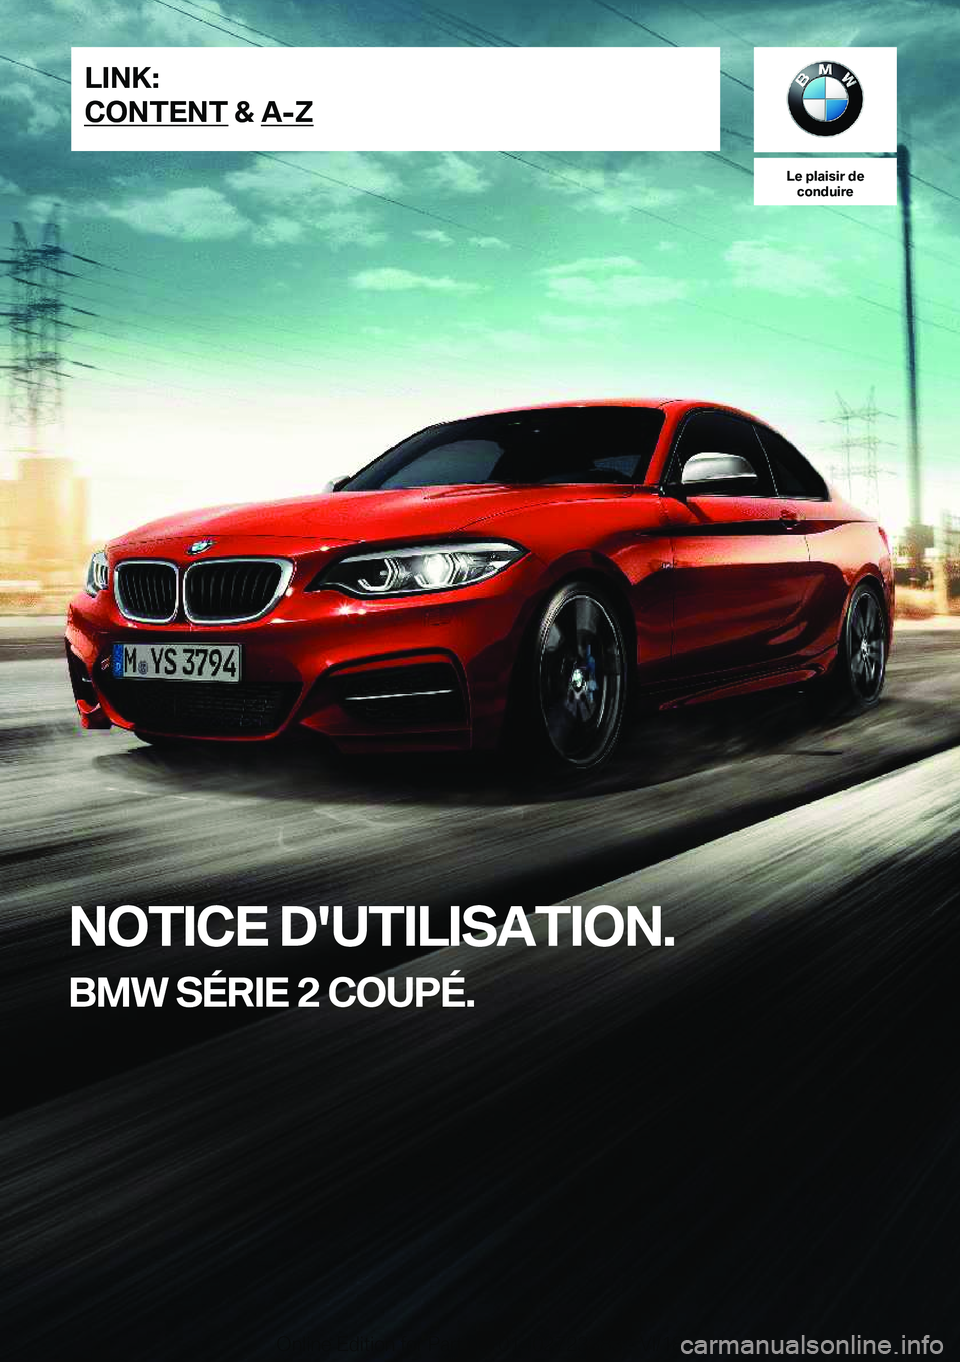 BMW 2 SERIES COUPE 2019  Notices Demploi (in French) �L�e��p�l�a�i�s�i�r��d�e�c�o�n�d�u�i�r�e
�N�O�T�I�C�E��D�'�U�T�I�L�I�S�A�T�I�O�N�.
�B�M�W��S�É�R�I�E��2��C�O�U�P�É�.�L�I�N�K�:
�C�O�N�T�E�N�T��&��A�-�;�O�n�l�i�n�e��E�d�i�t�i�o�n��f�o�